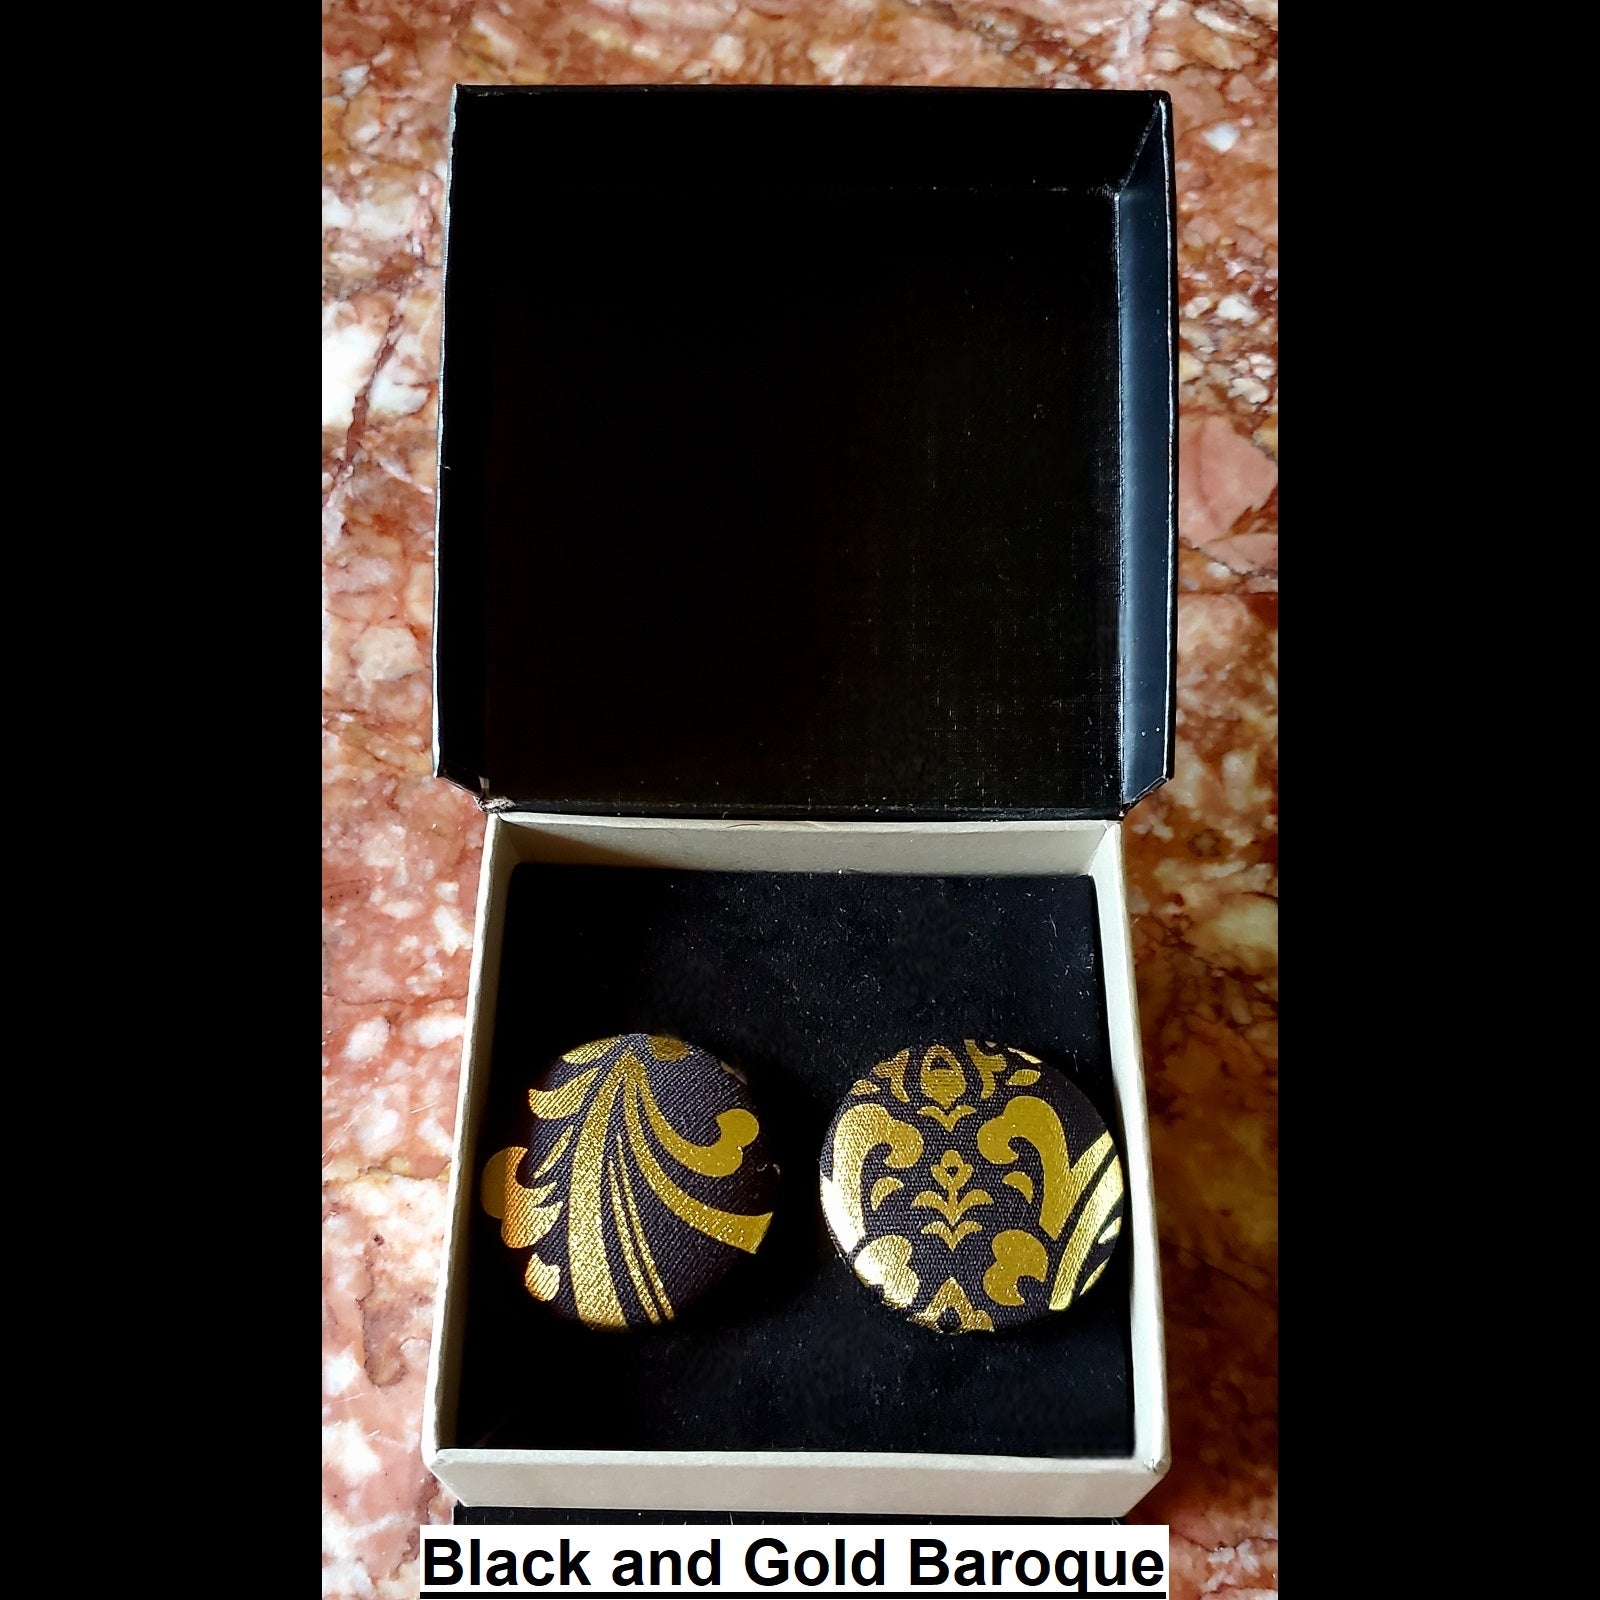 black and gold baroque print button earrings in jewelry box